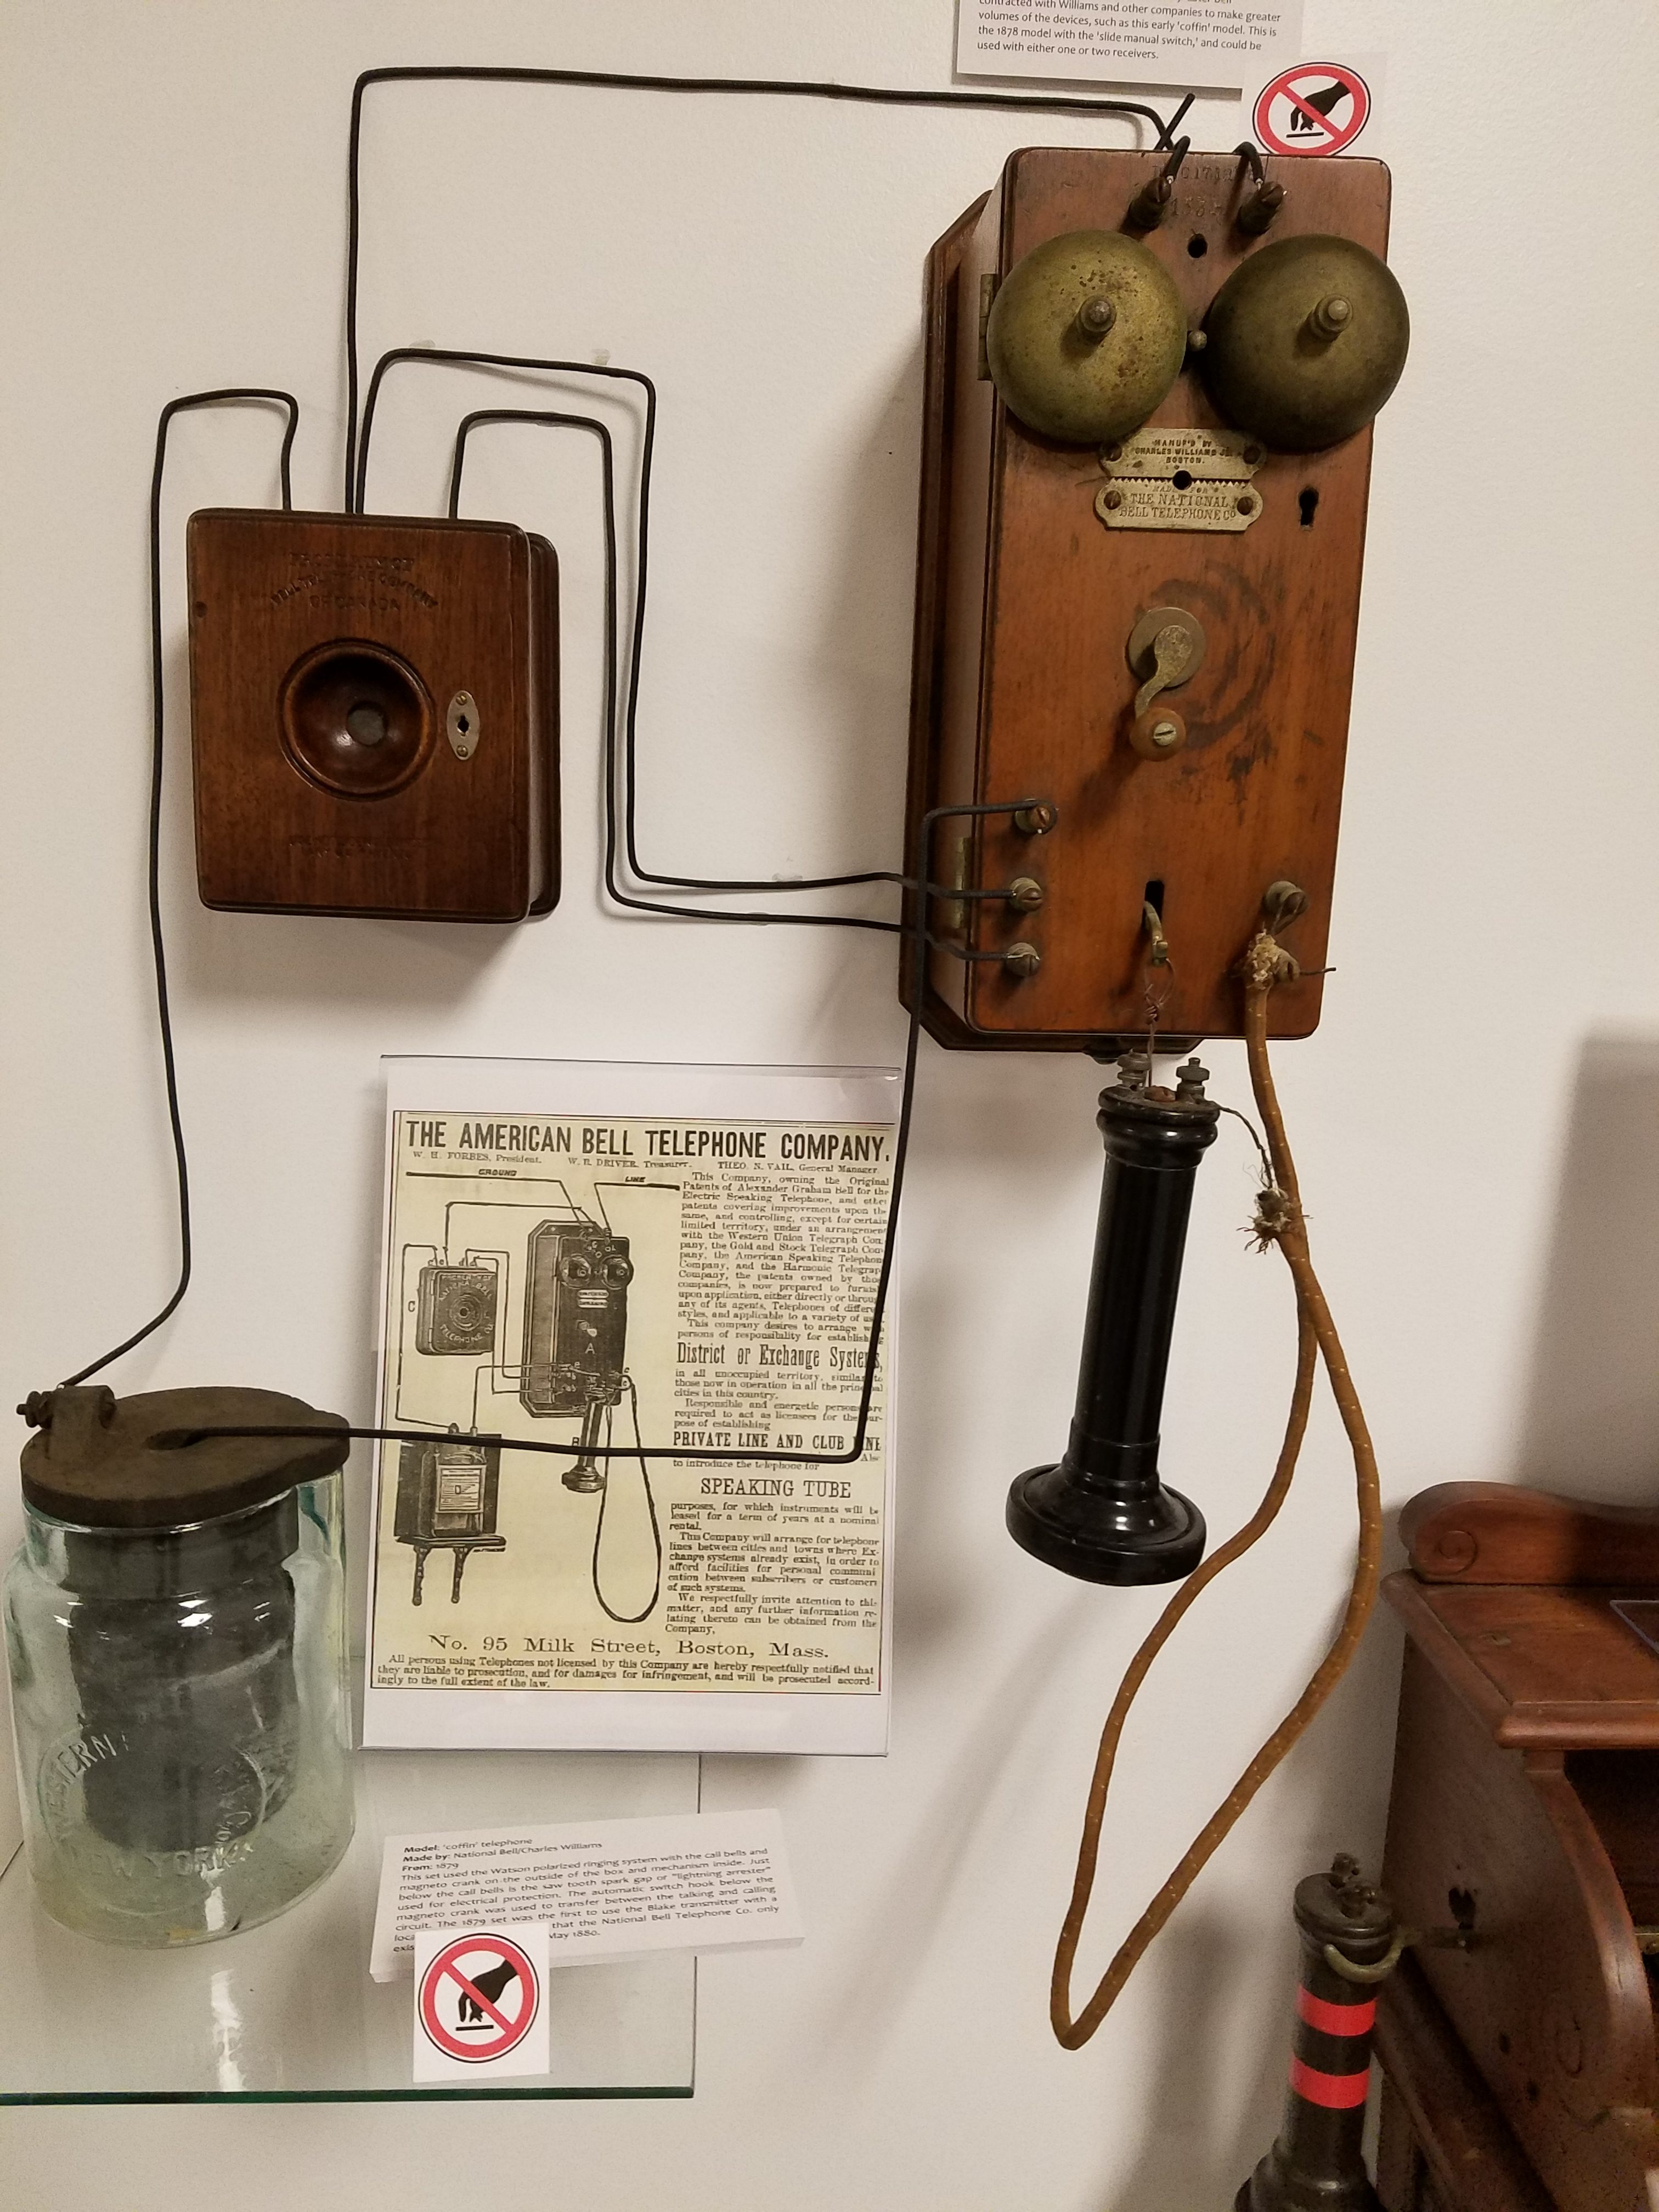 Charles Williams Jr. Coffin Phone Exhibit at The Telephone Museum